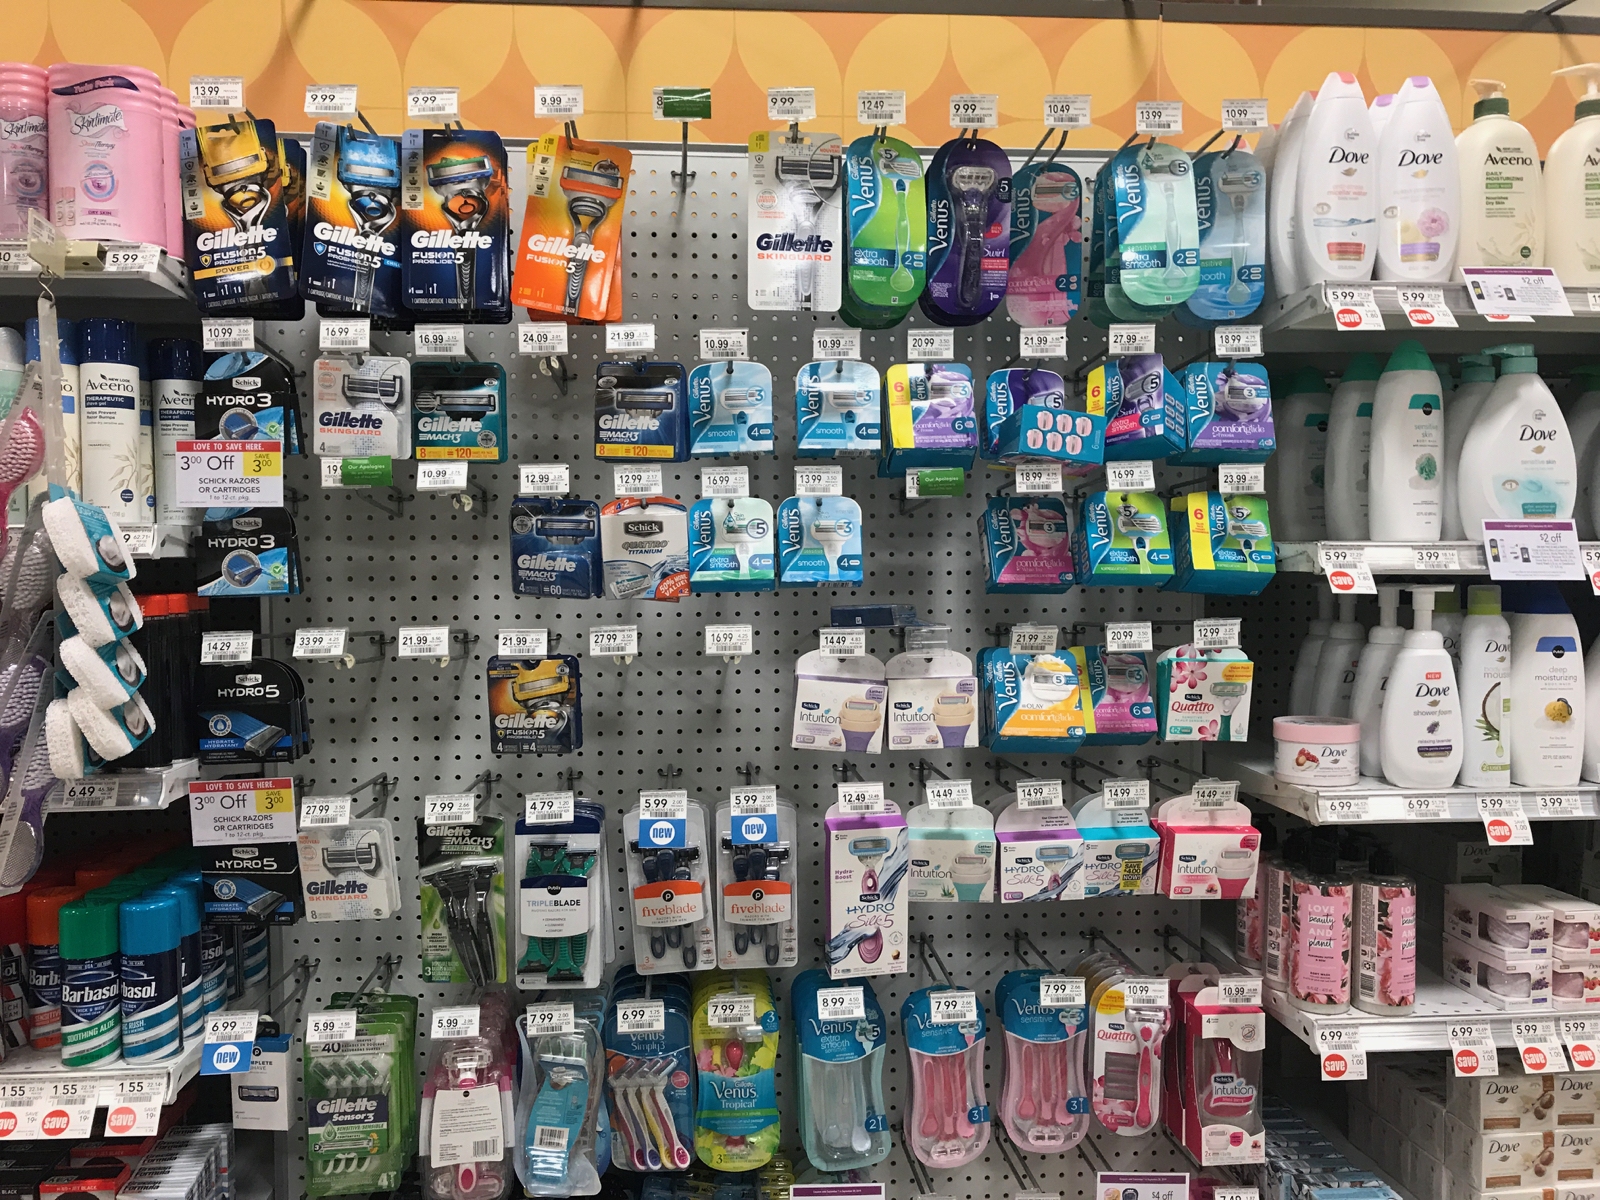 Shelves of products showing clear gender marketing divides; male and female razors that are blue and pink respectively, soap, and other products.